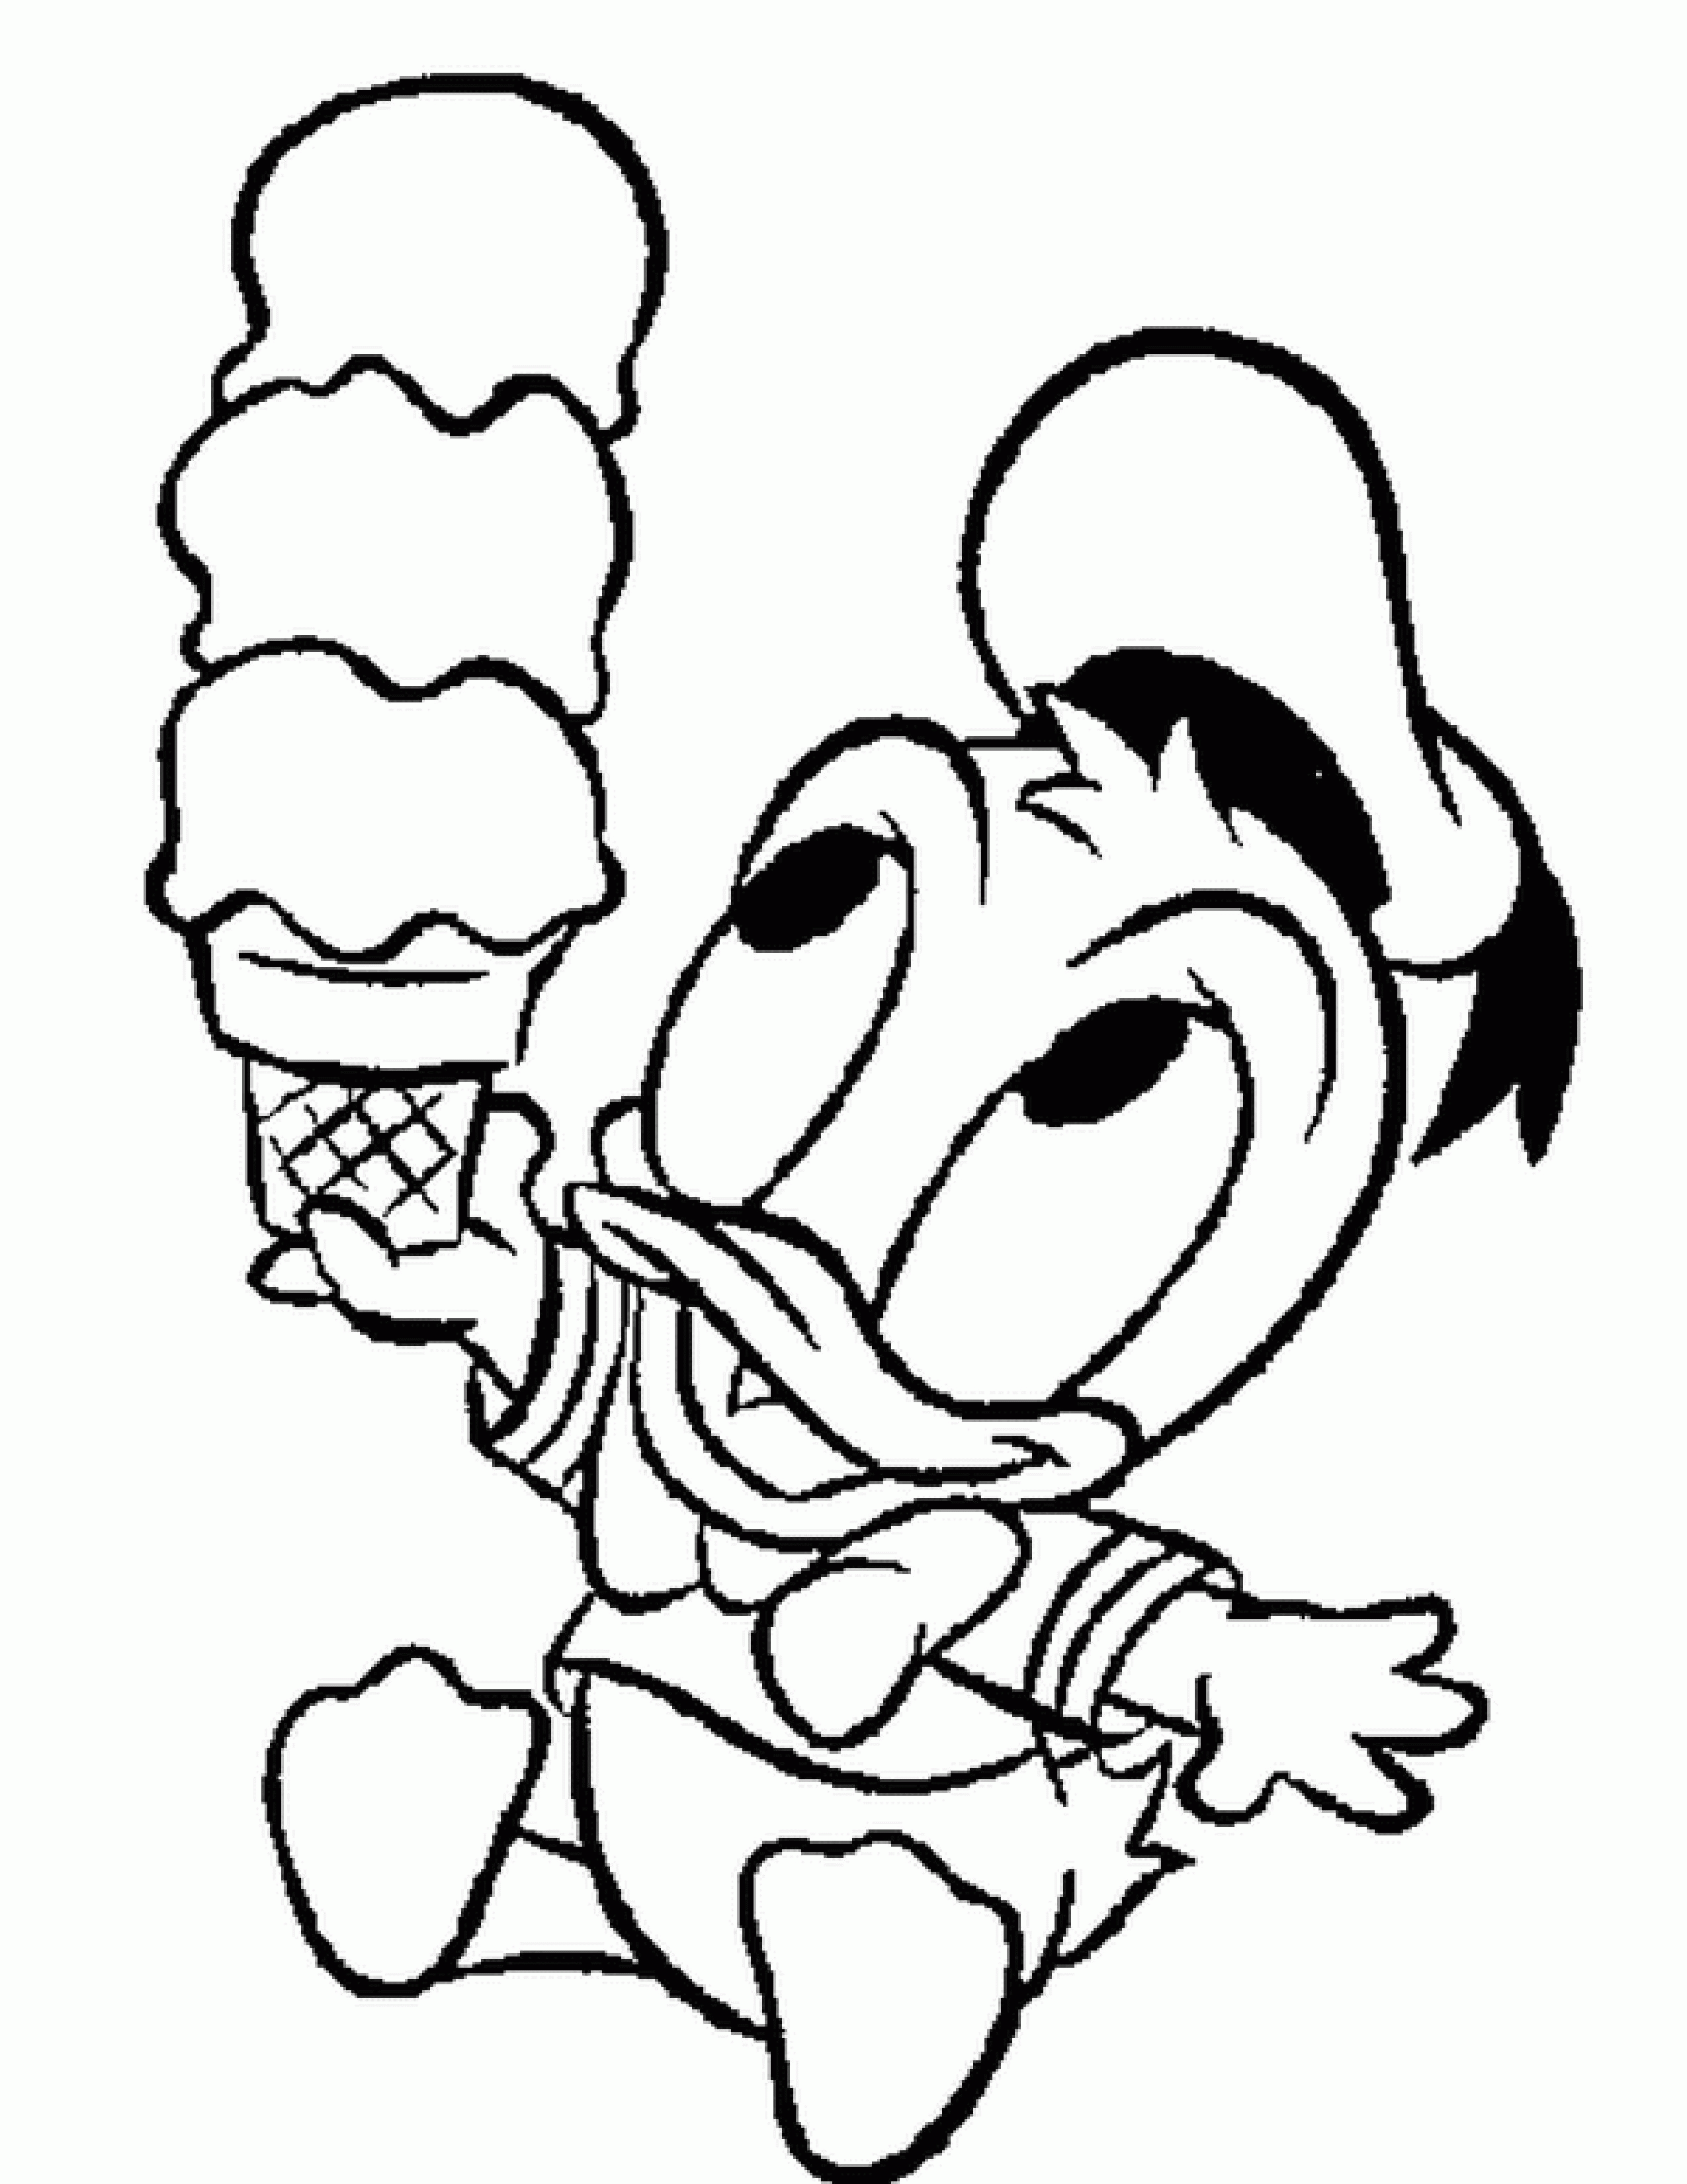 Download Walt Disney World Coloring Pages - Coloring Page Photos ...